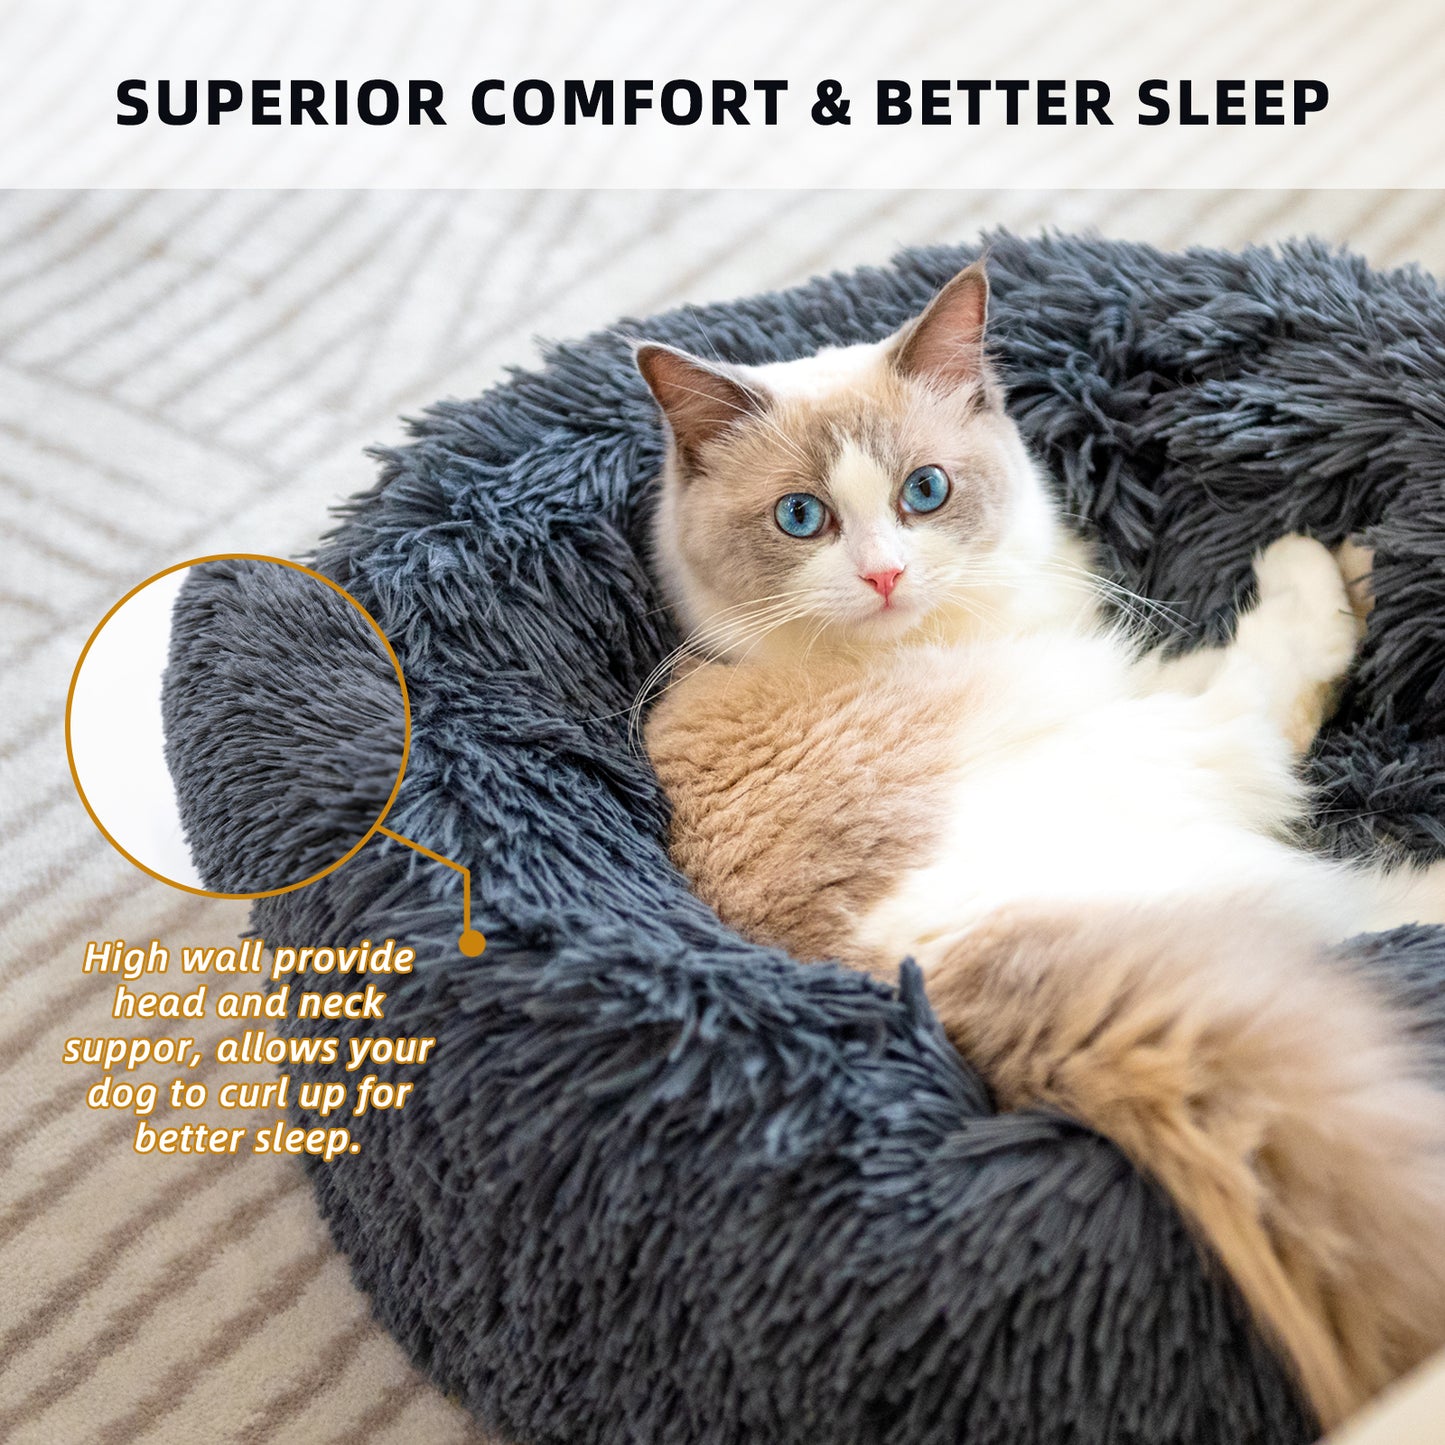 Pet Beds For Cats Anti Anxiety Fluffy Dog Bed Cuddler With Anti-Slip & Water-Resistant Bottom Washable Calming Dog Bed For Small Medium Pets